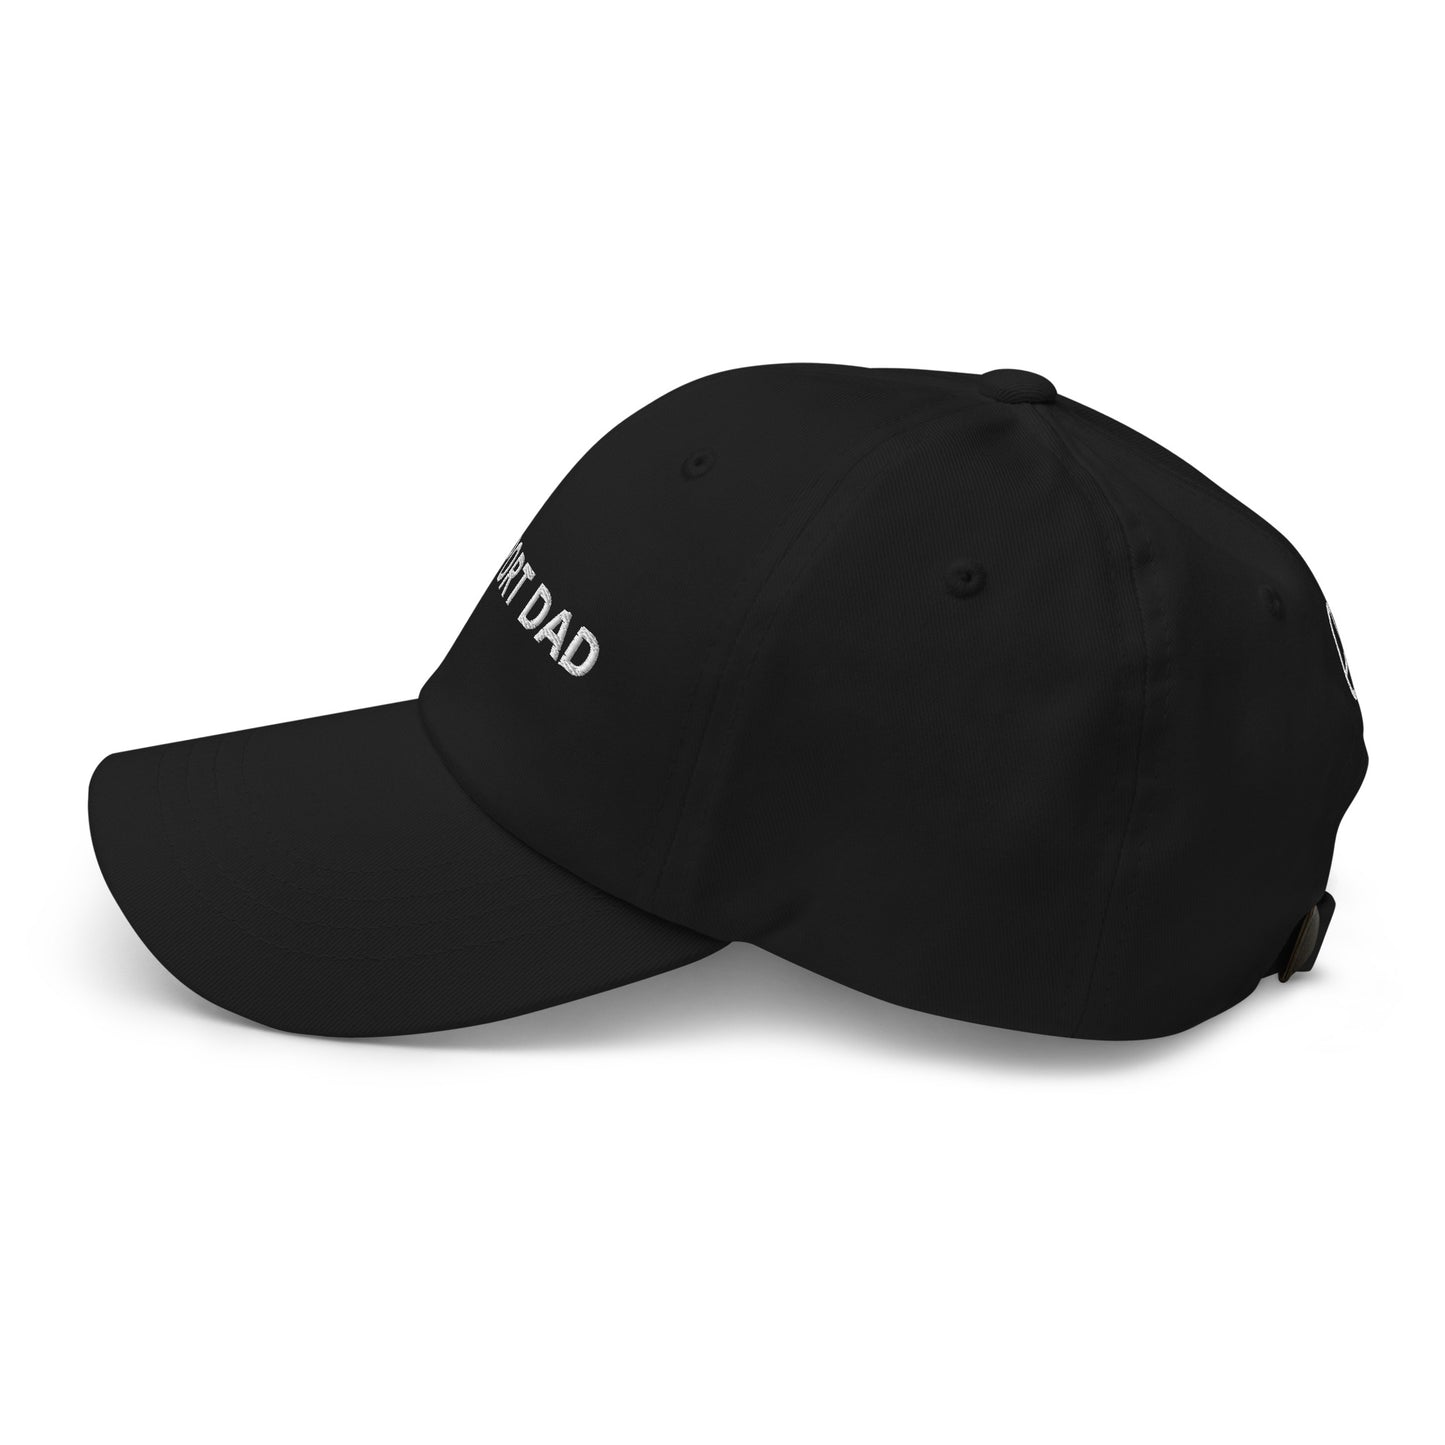 Airport Dad Embroidered Hat (Black/Navy)